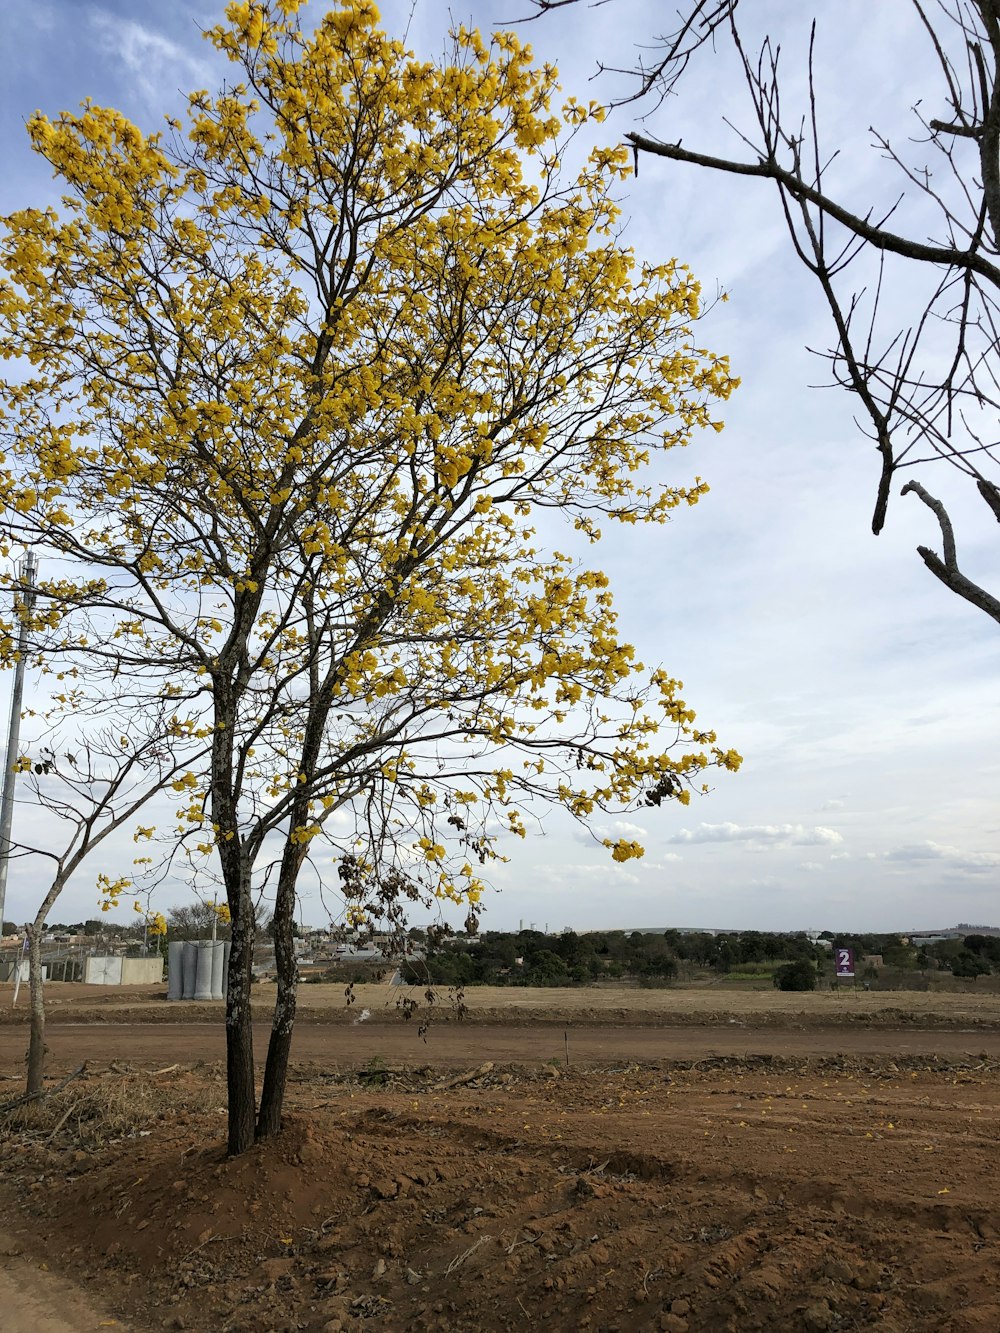 a tree with yellow flowers in a dirt field